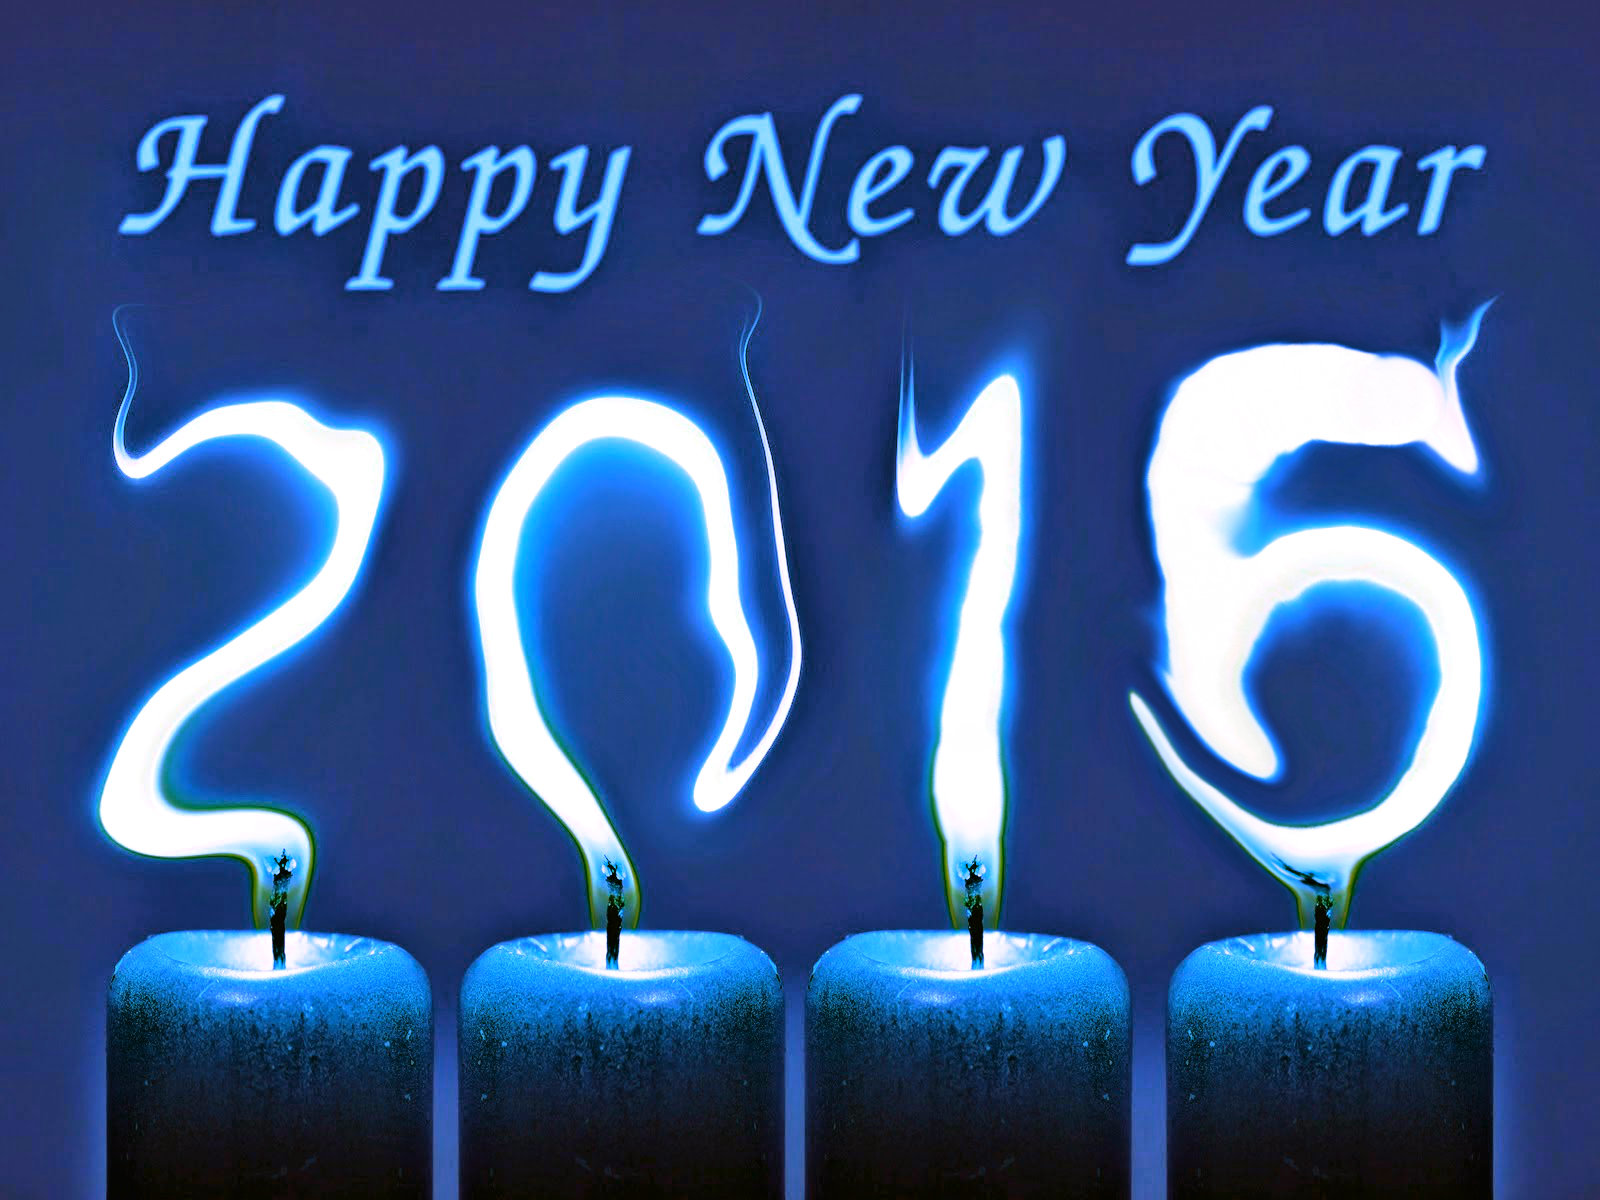 Happy New Year 2016 Wallpapers Pictures Images